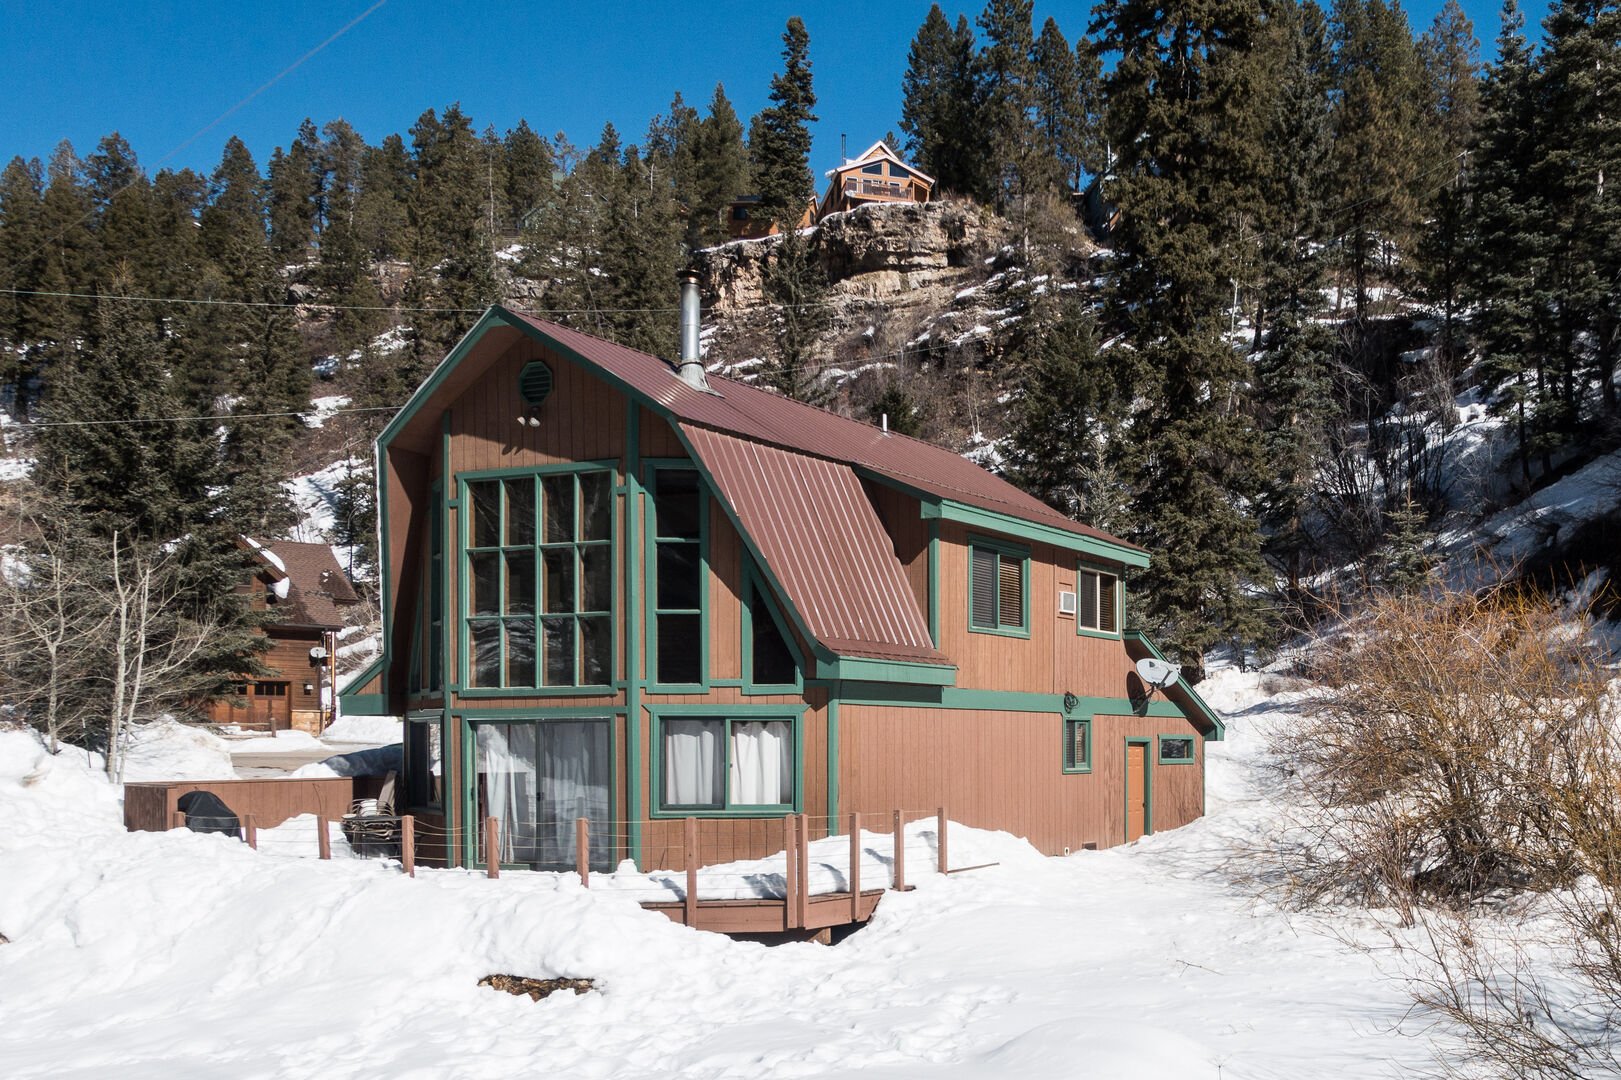 A snowy view of one of our 2 Bedroom Durango Vacation Homes